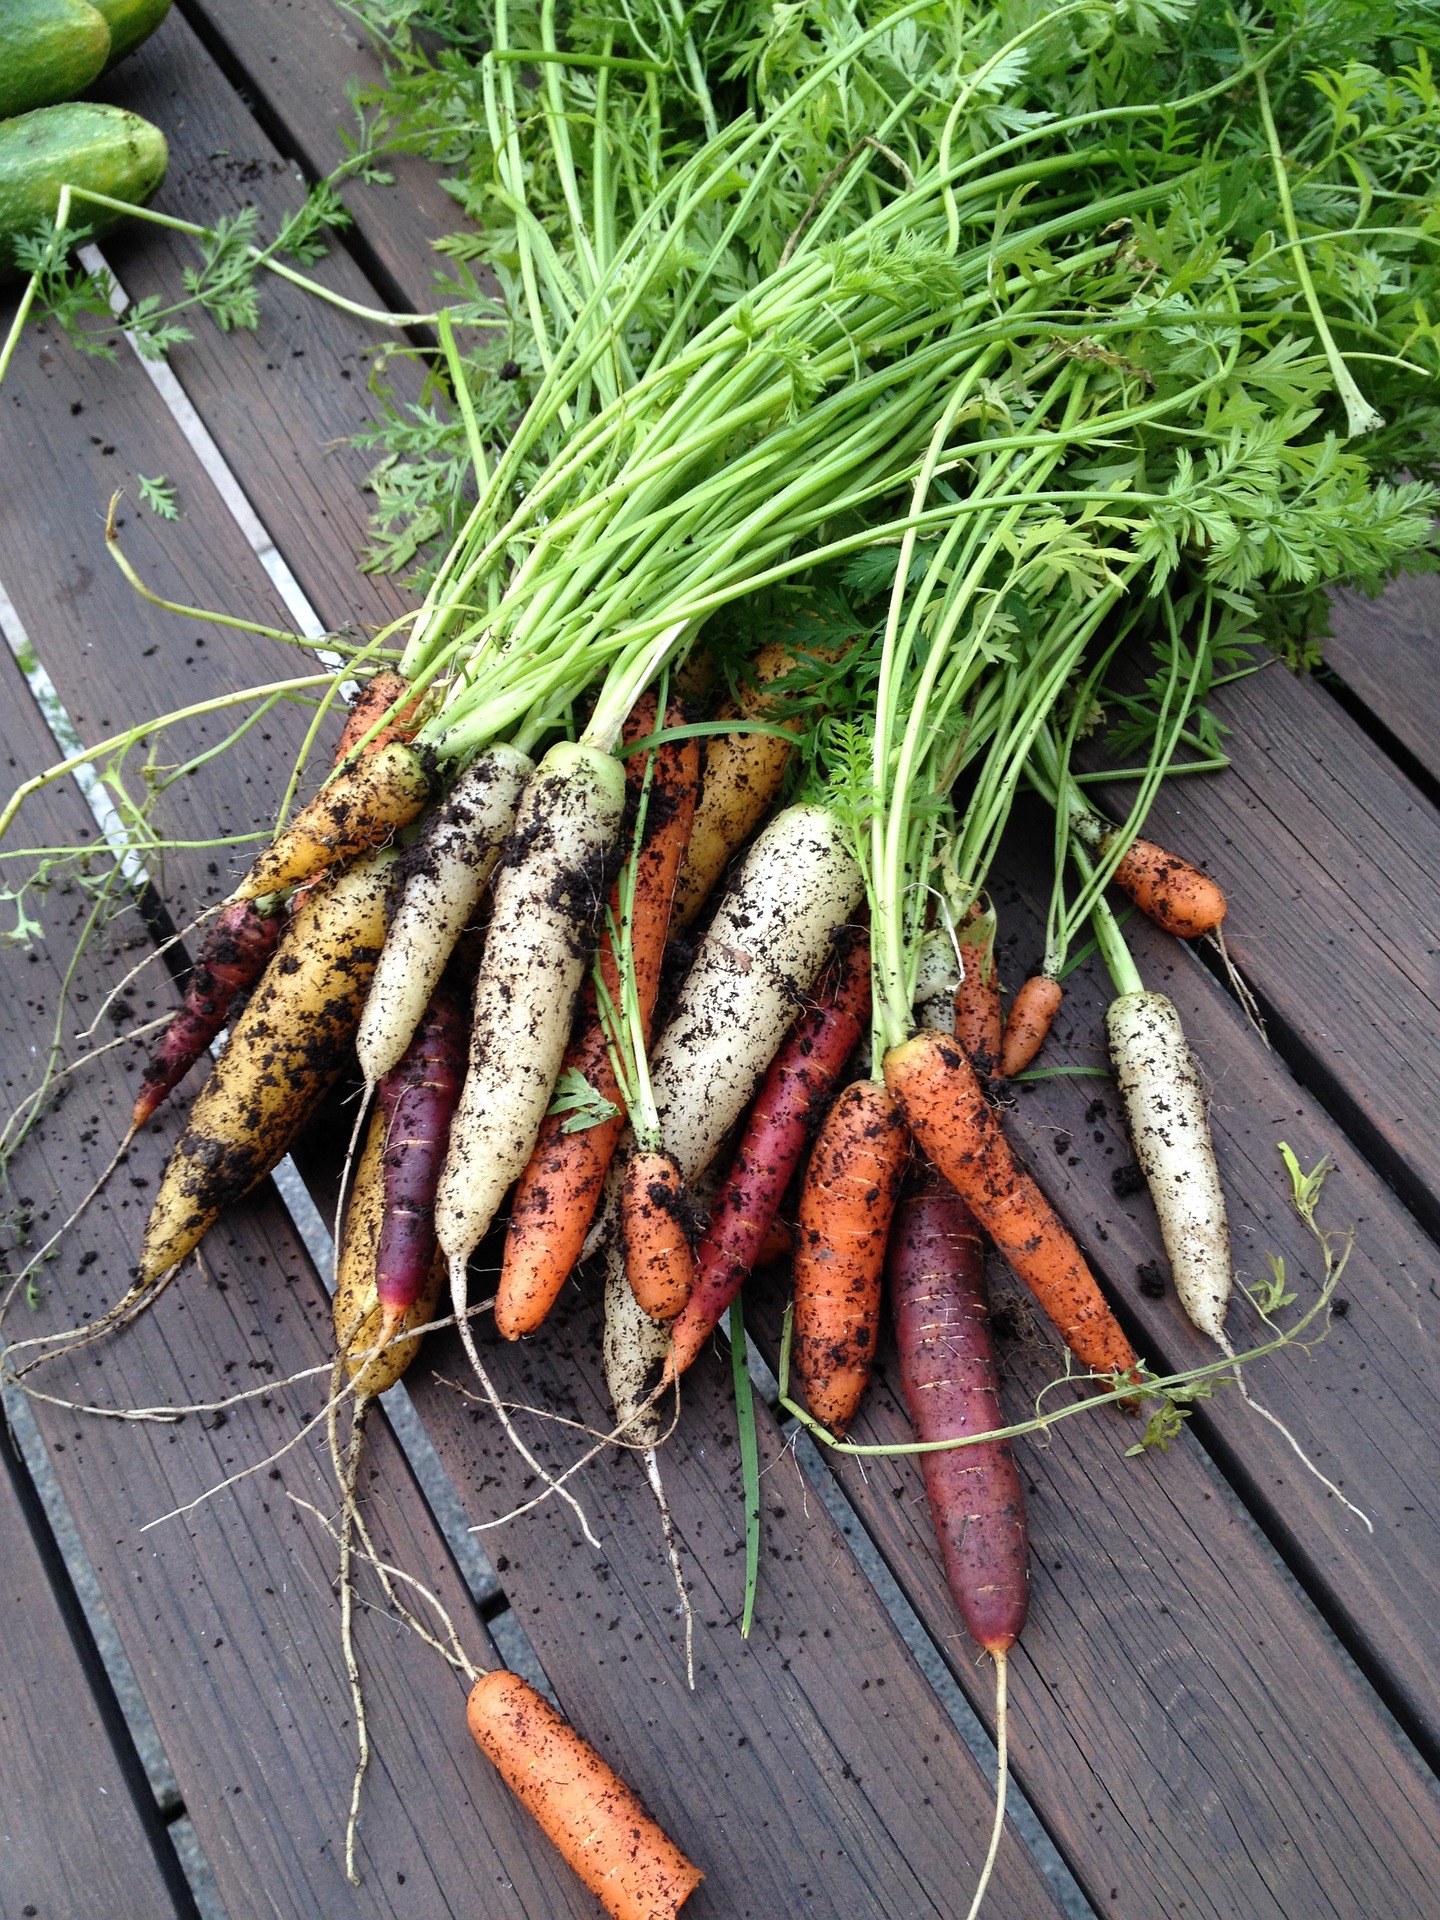 Colorful carrots recently pulled from the ground.